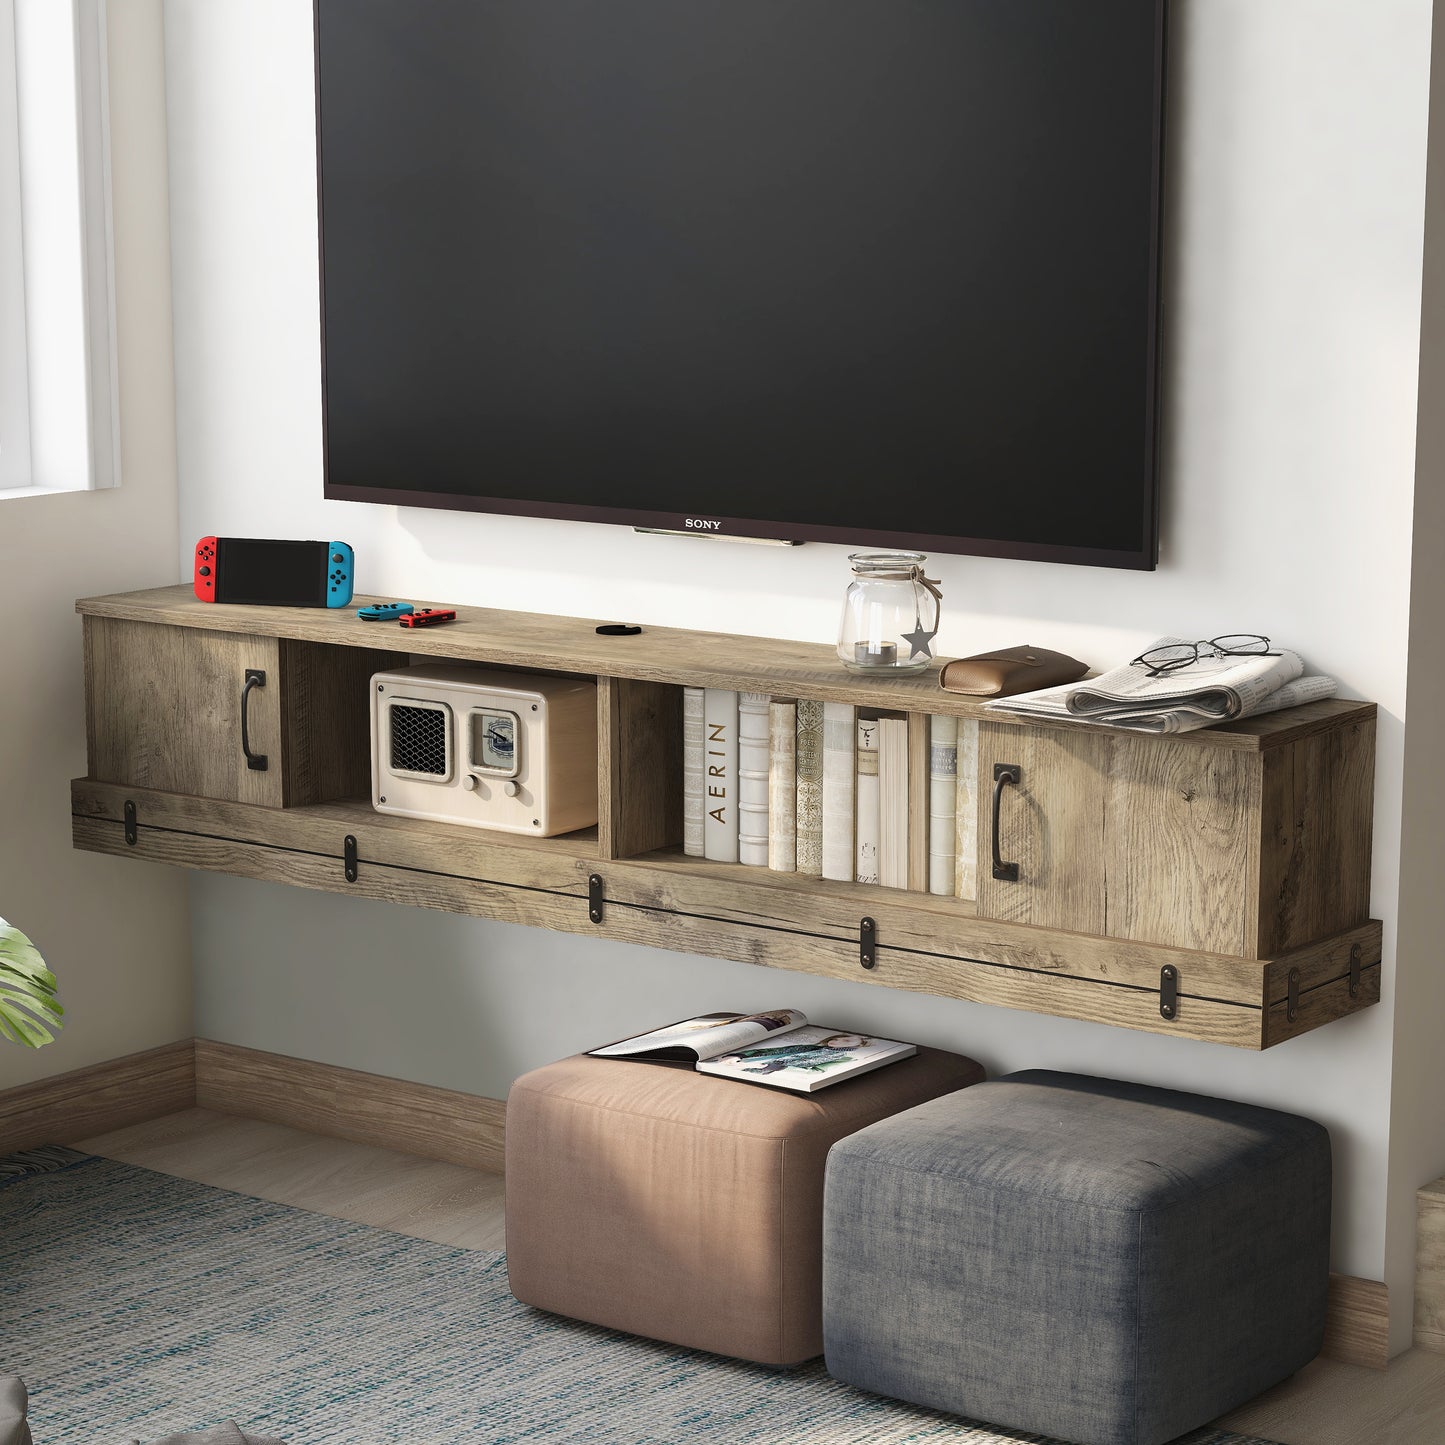 Left angled rustic weathered oak two-door two-shelf floating TV stand in a living room with accessories